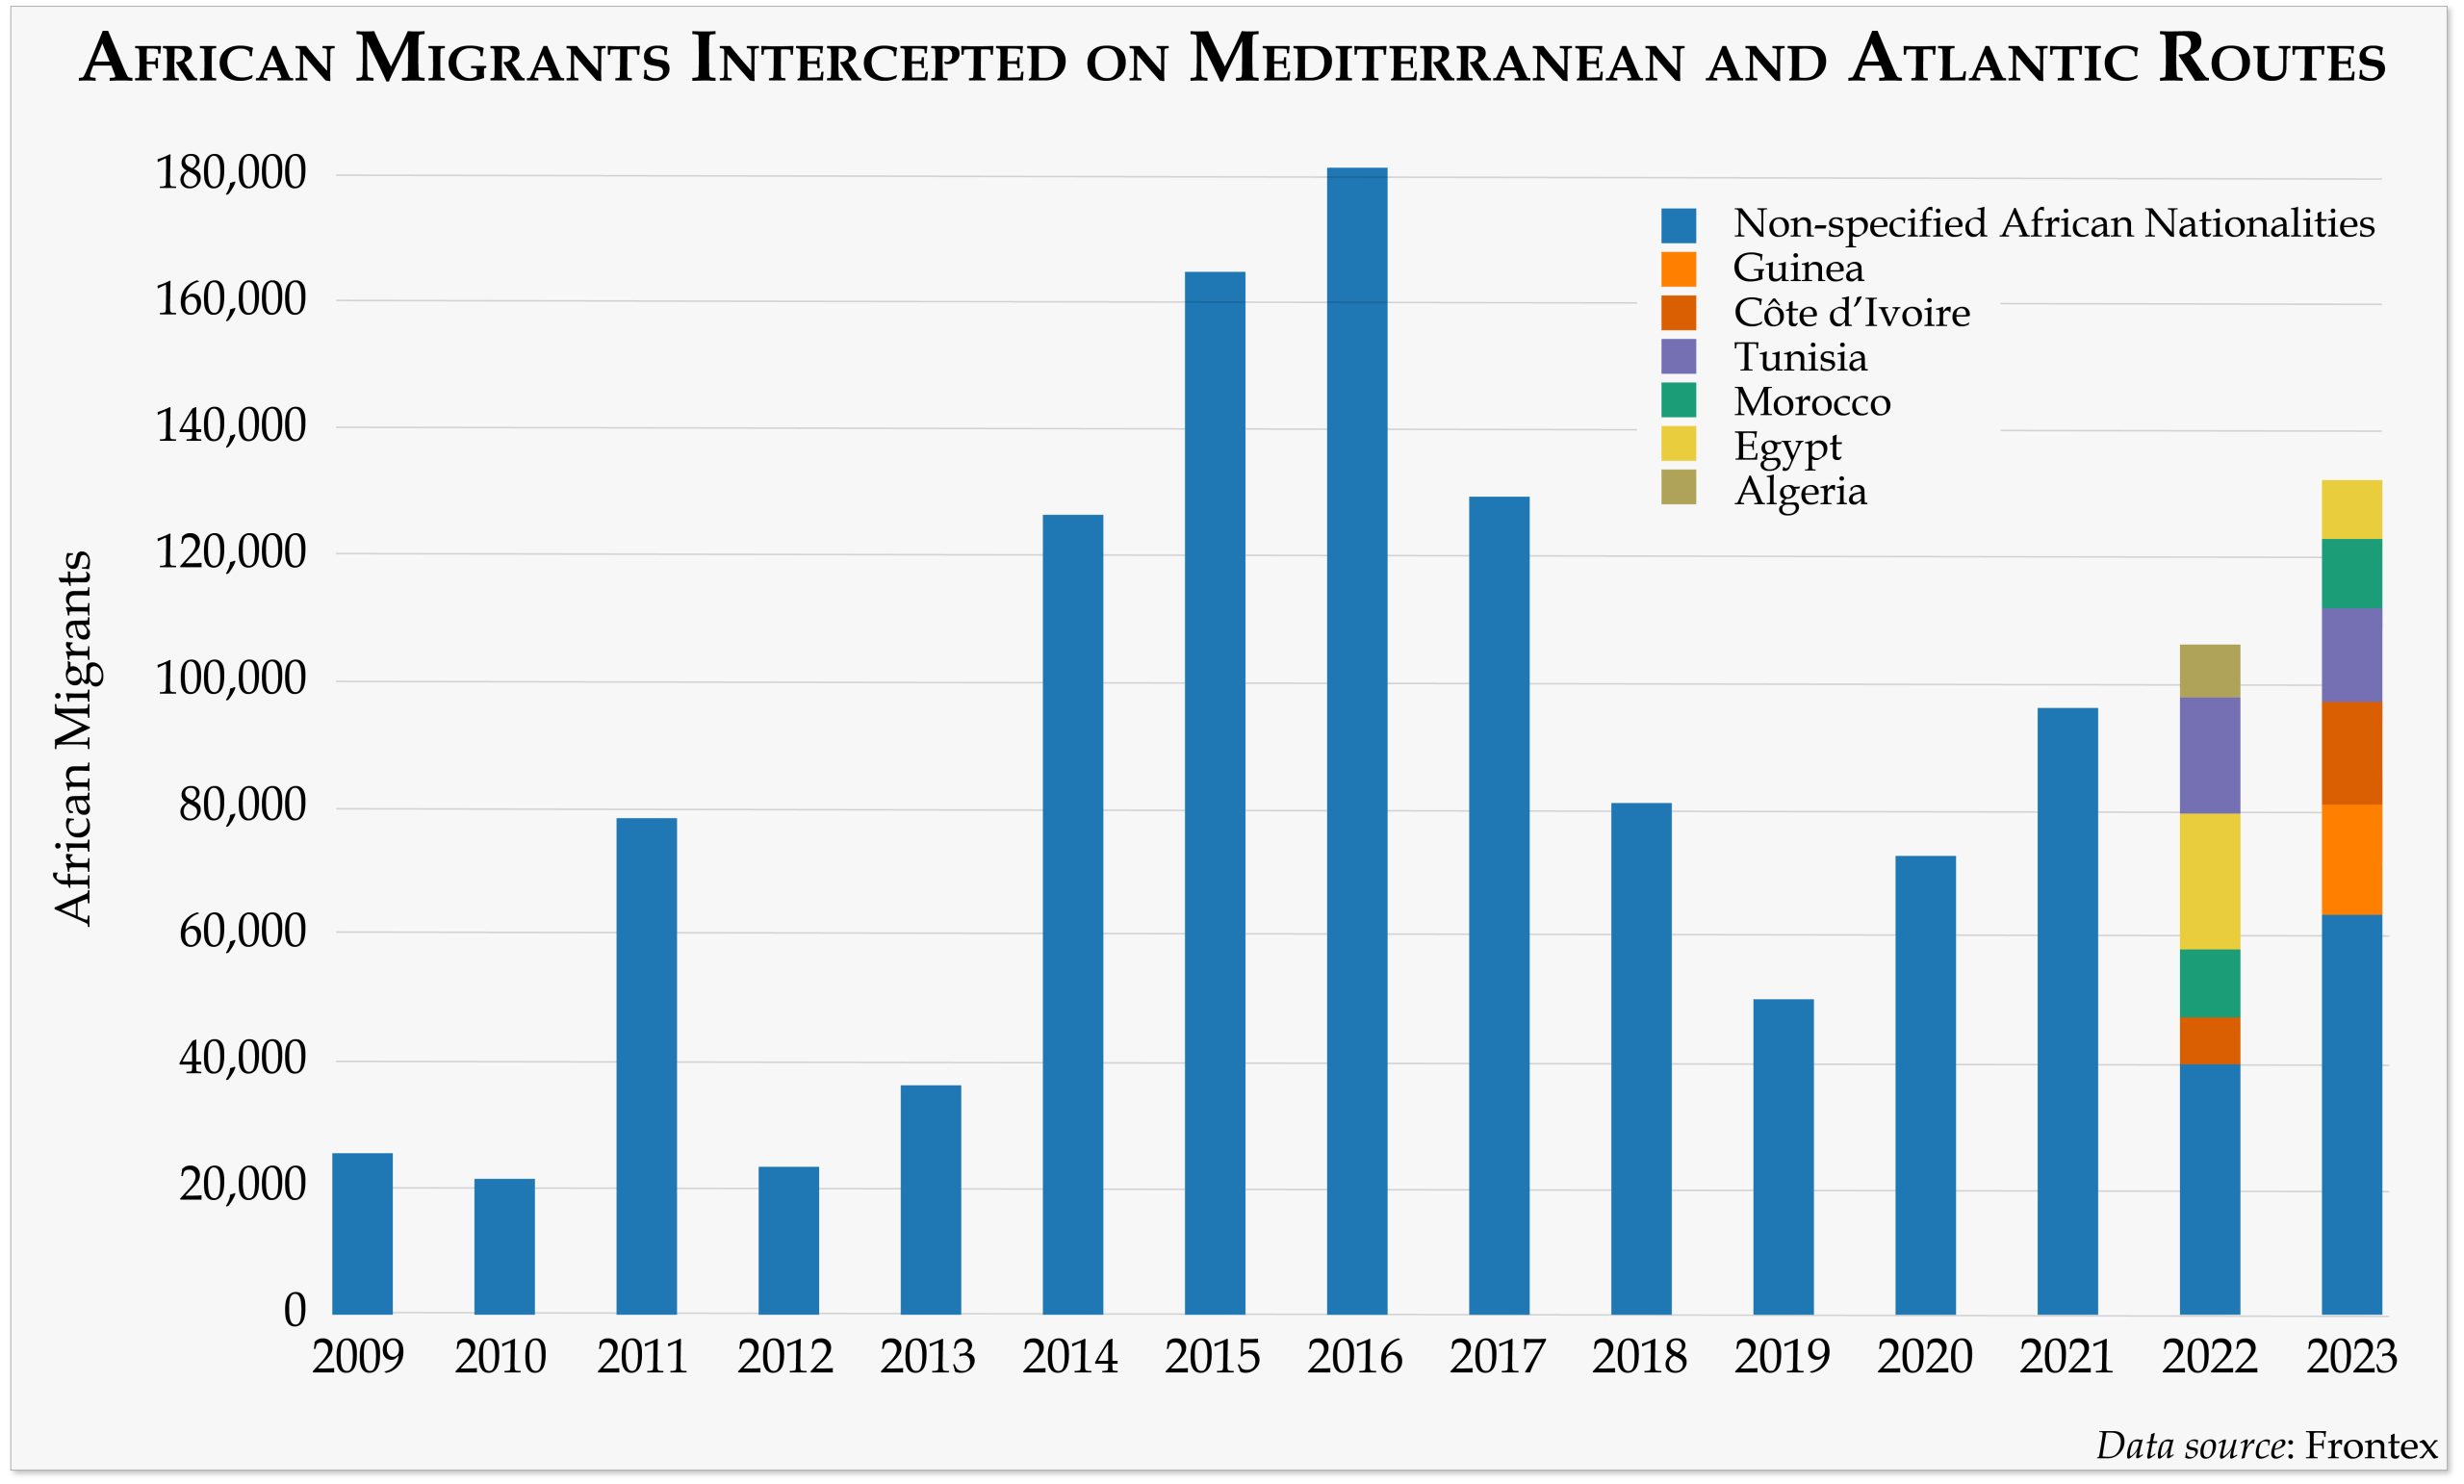 Africa migrants intercepted on Mediterranean and Atlantic Routes